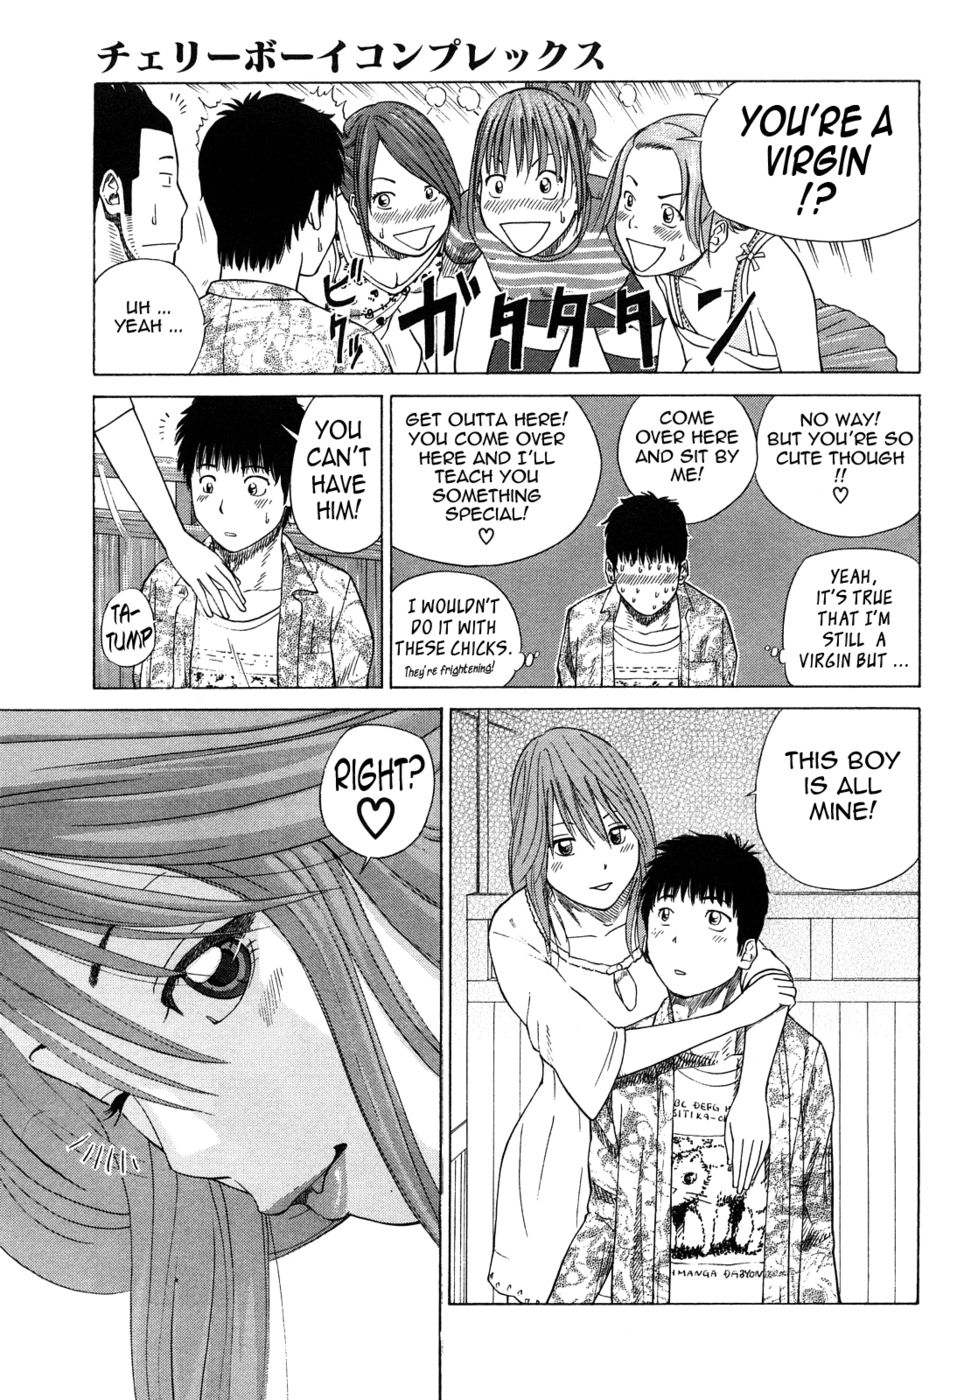 Hentai Manga Comic-Young Wife & High School Girl Collection-Chapter 10-Virgin Boy Complex-3